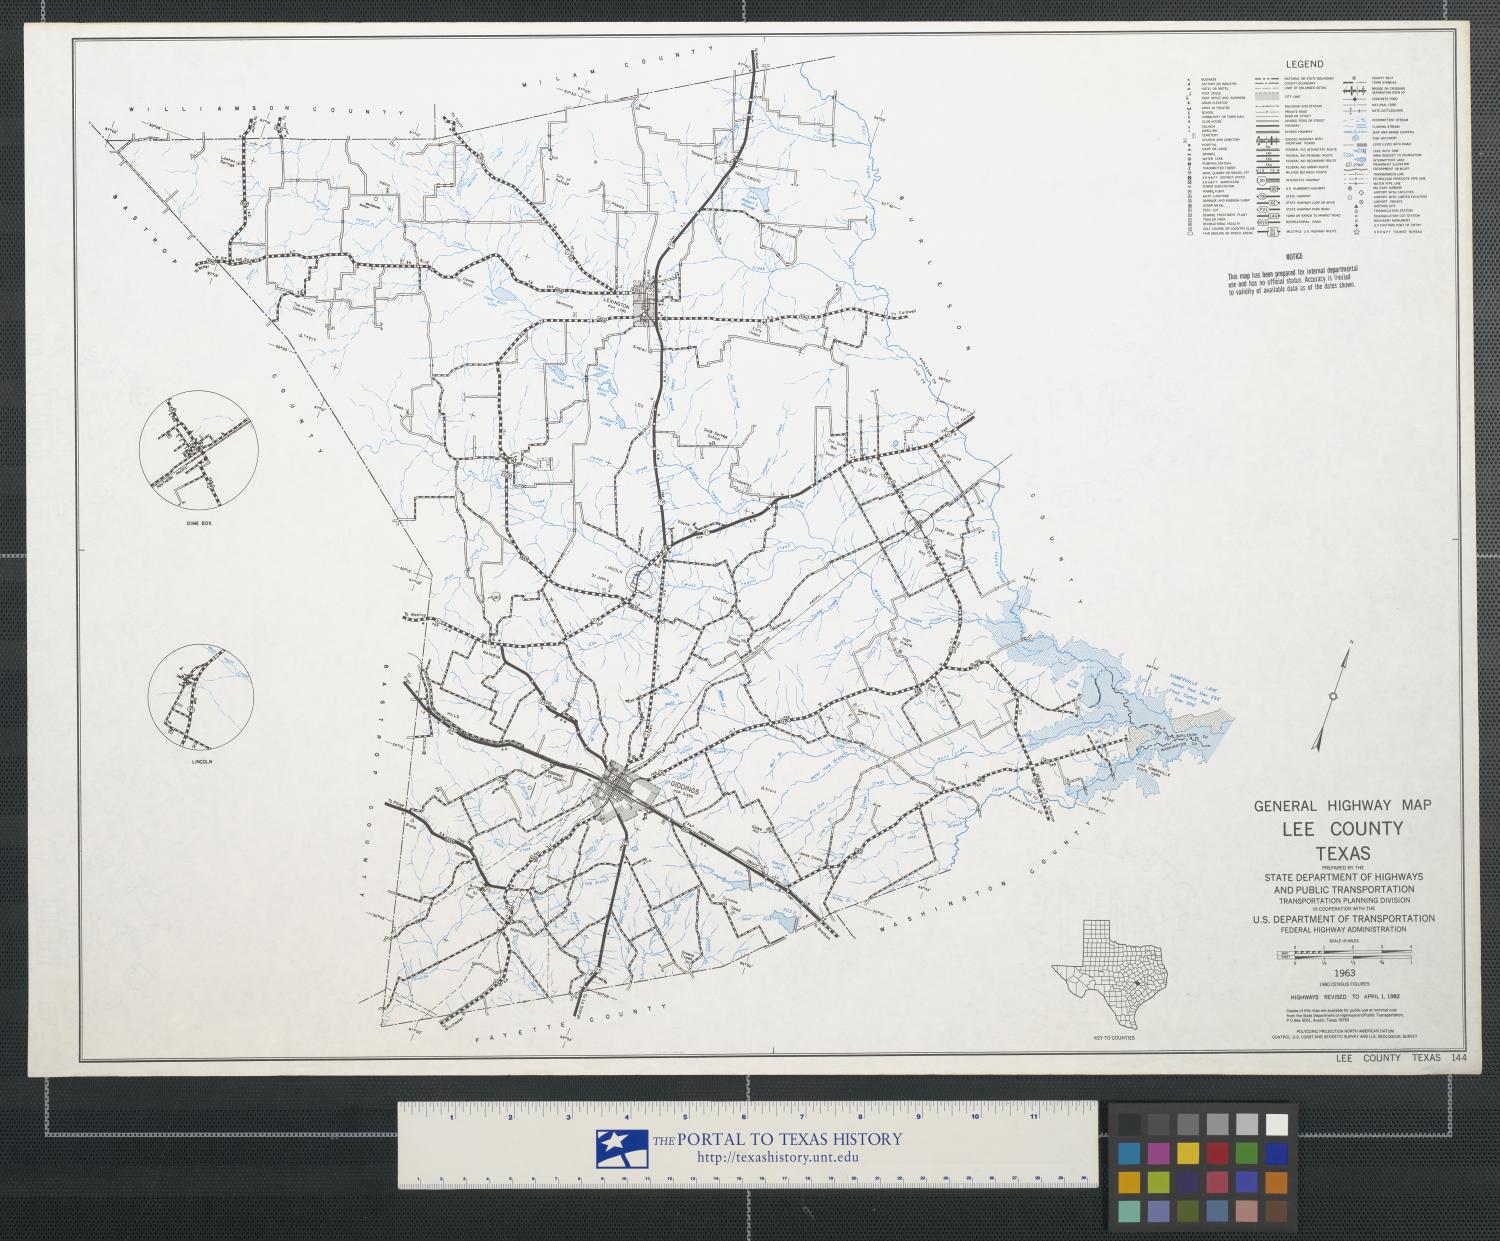 General highway map Lee County Texas - The Portal to Texas History